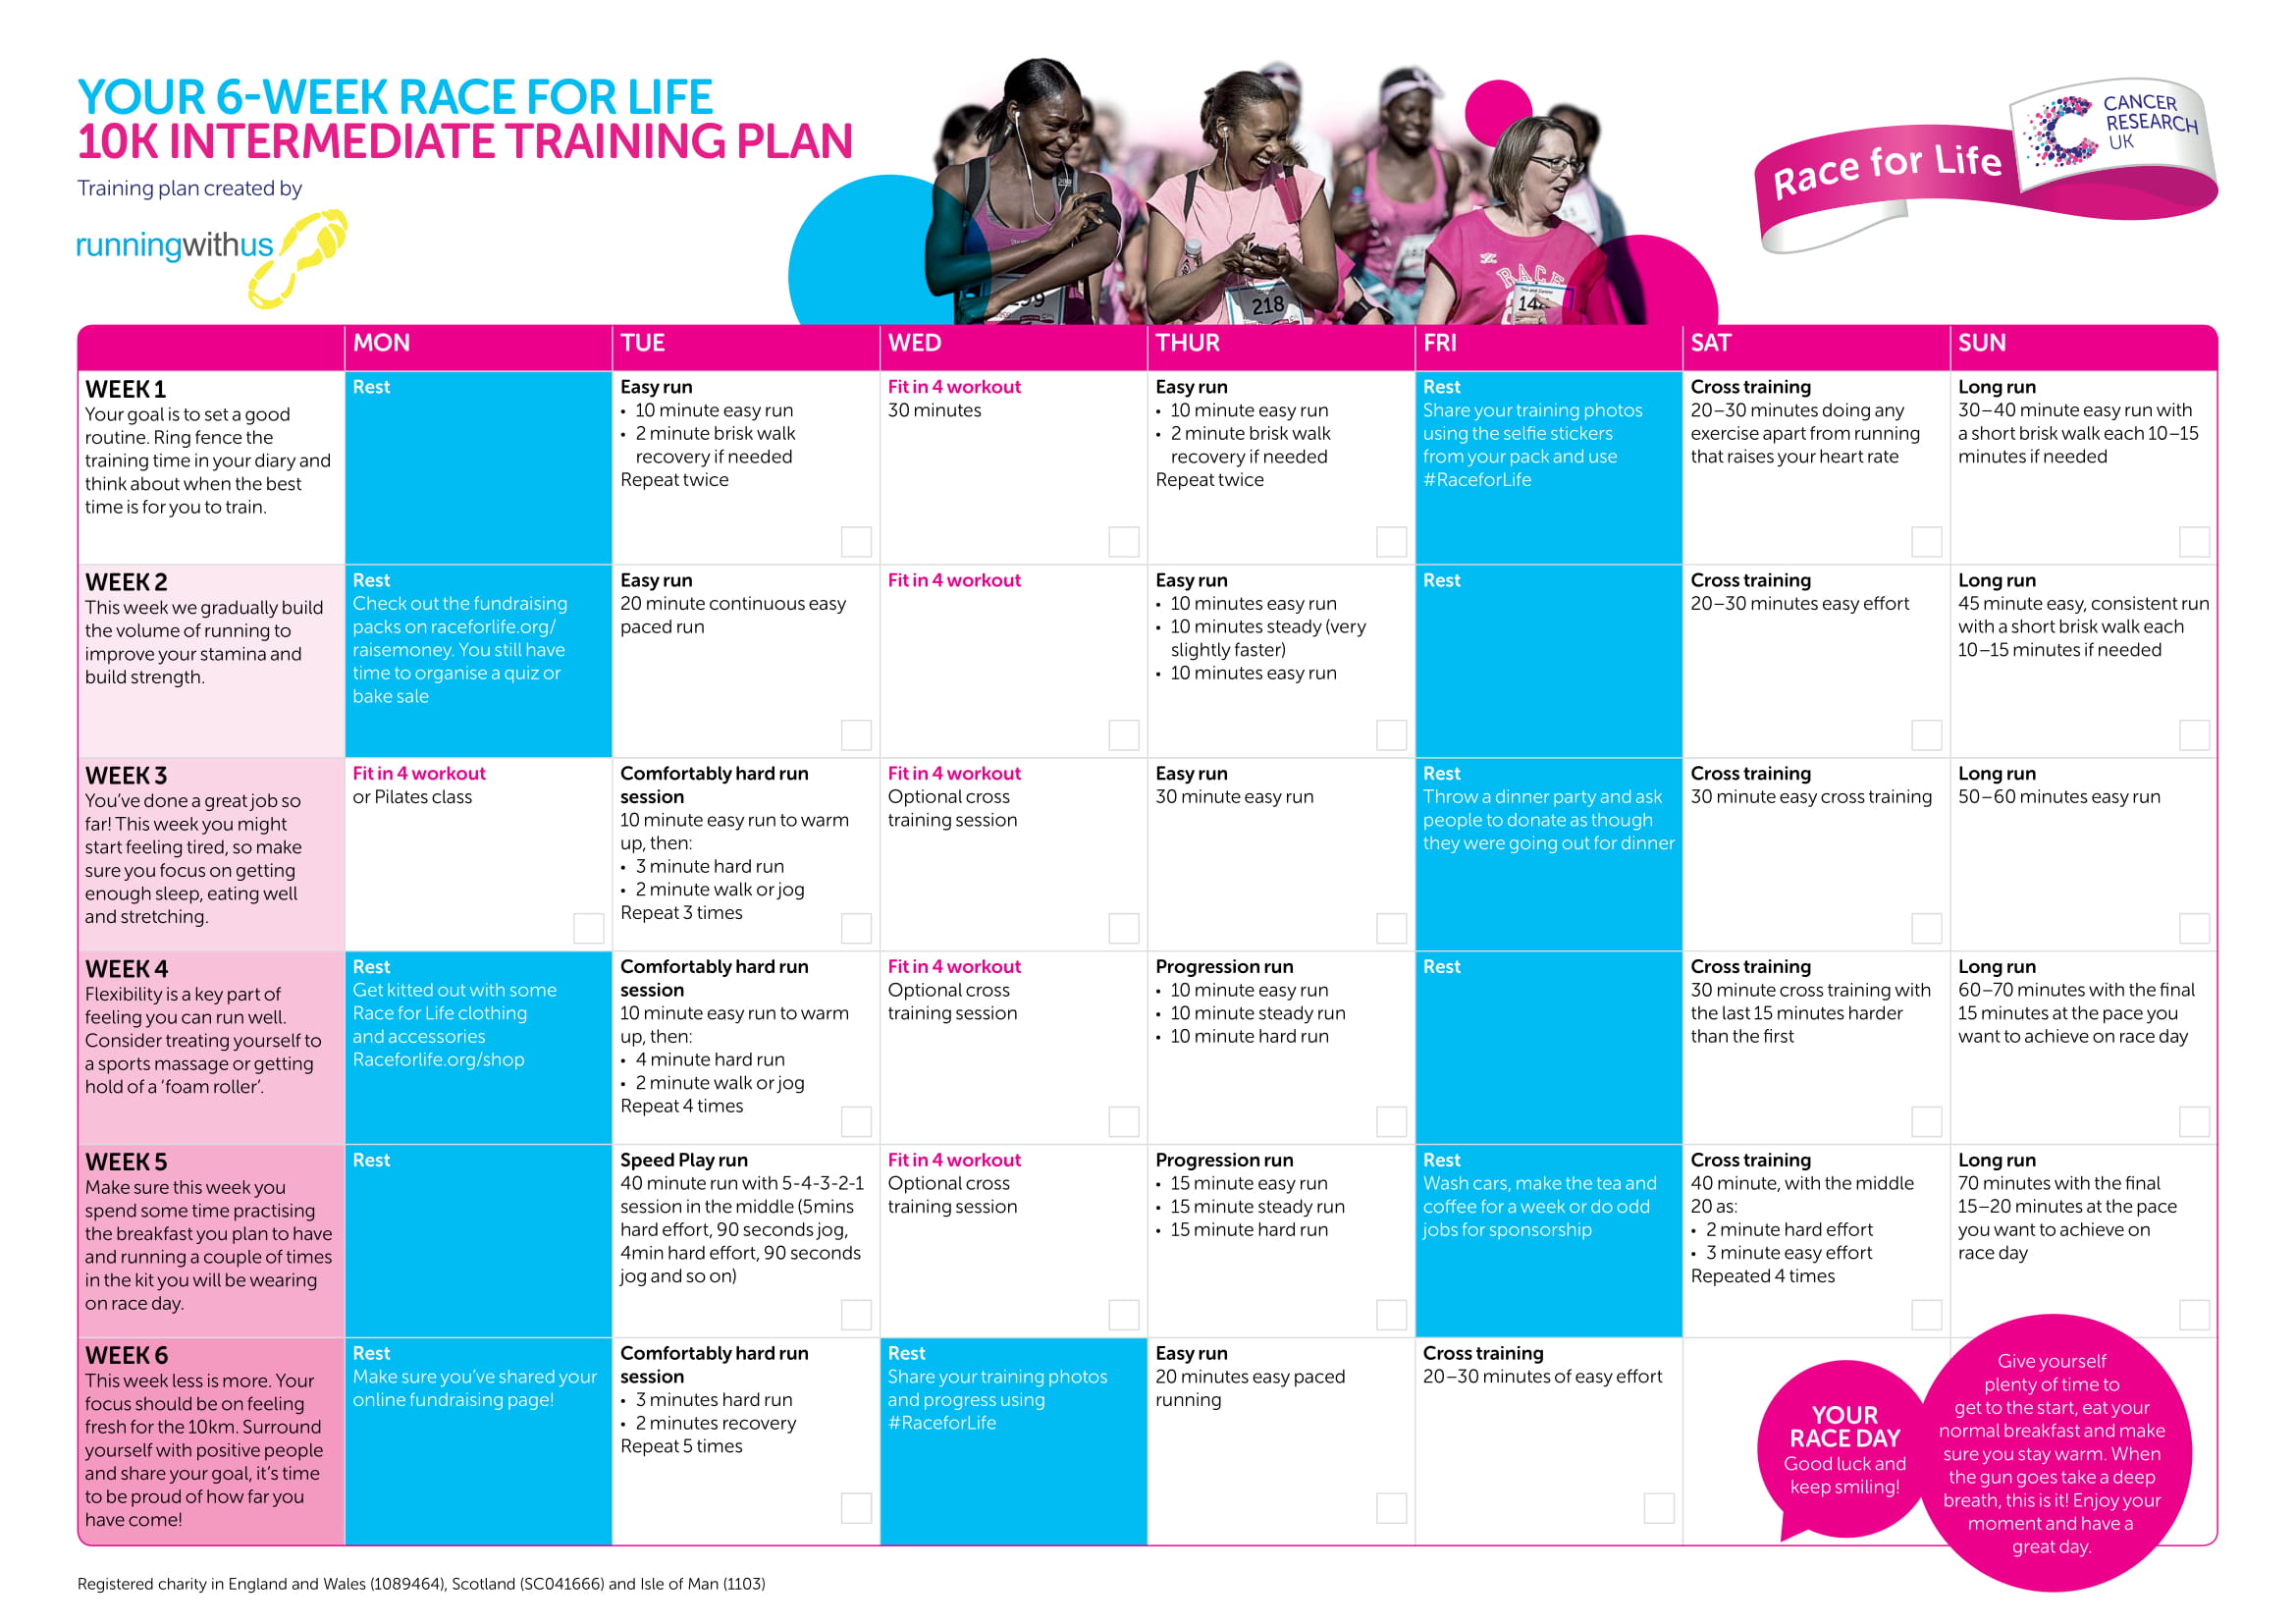 10k training plans | race for life | cancer research uk